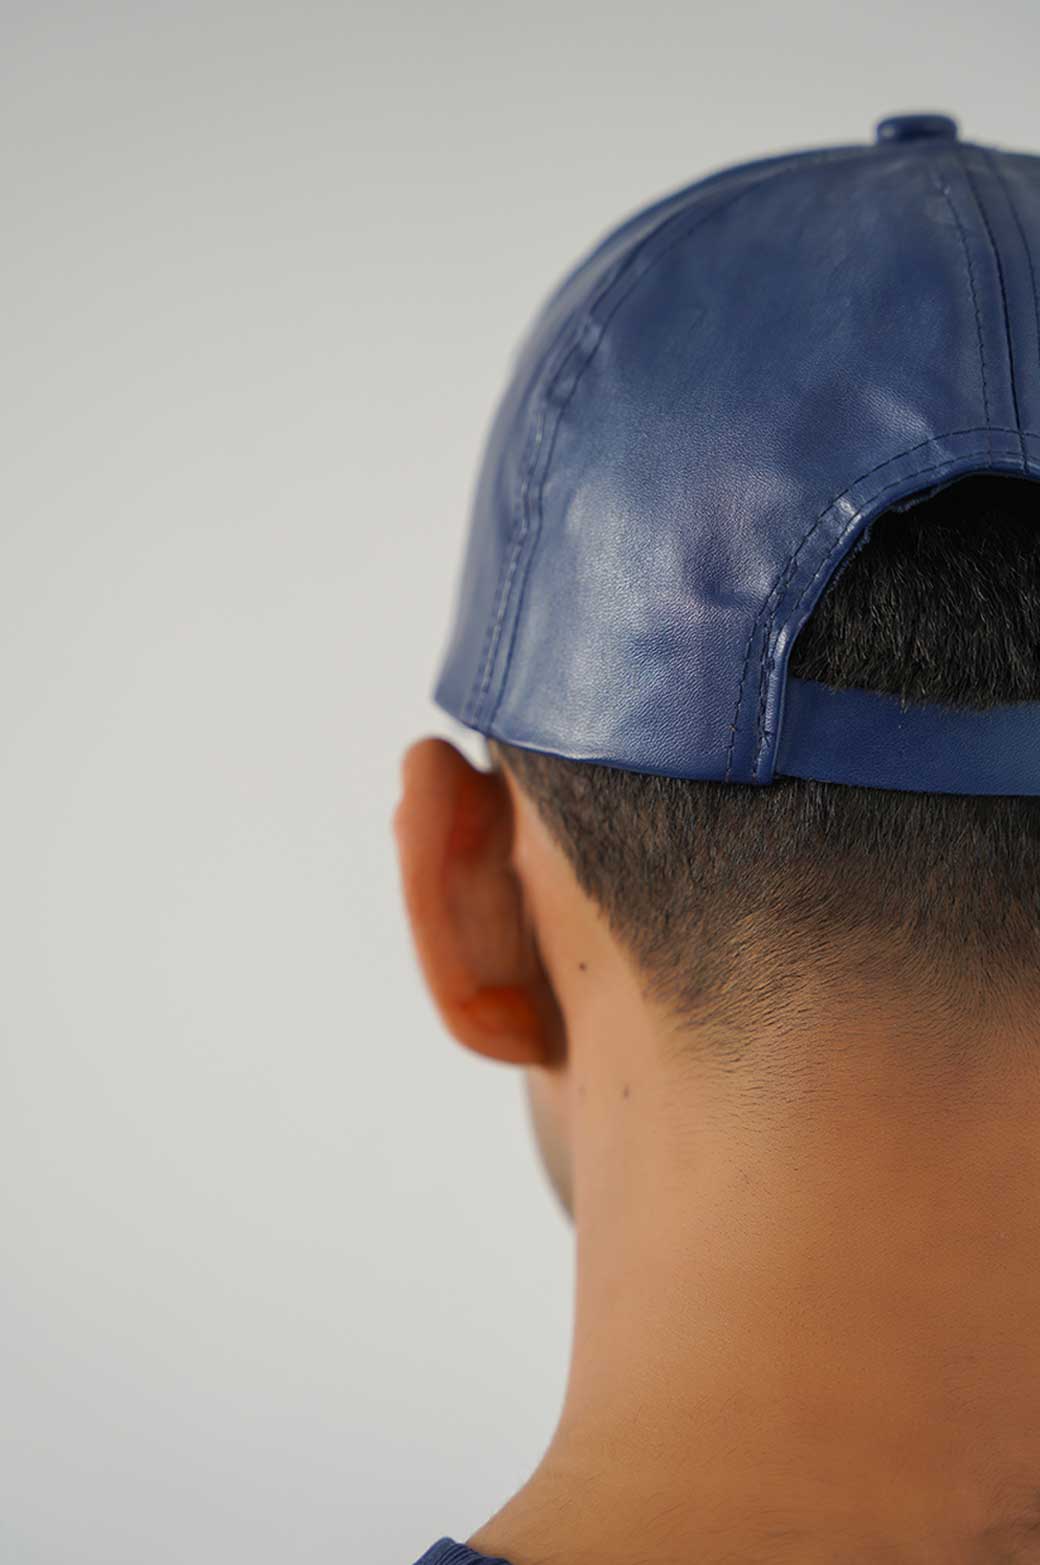 Faux Leather Cap - Valetica Sports